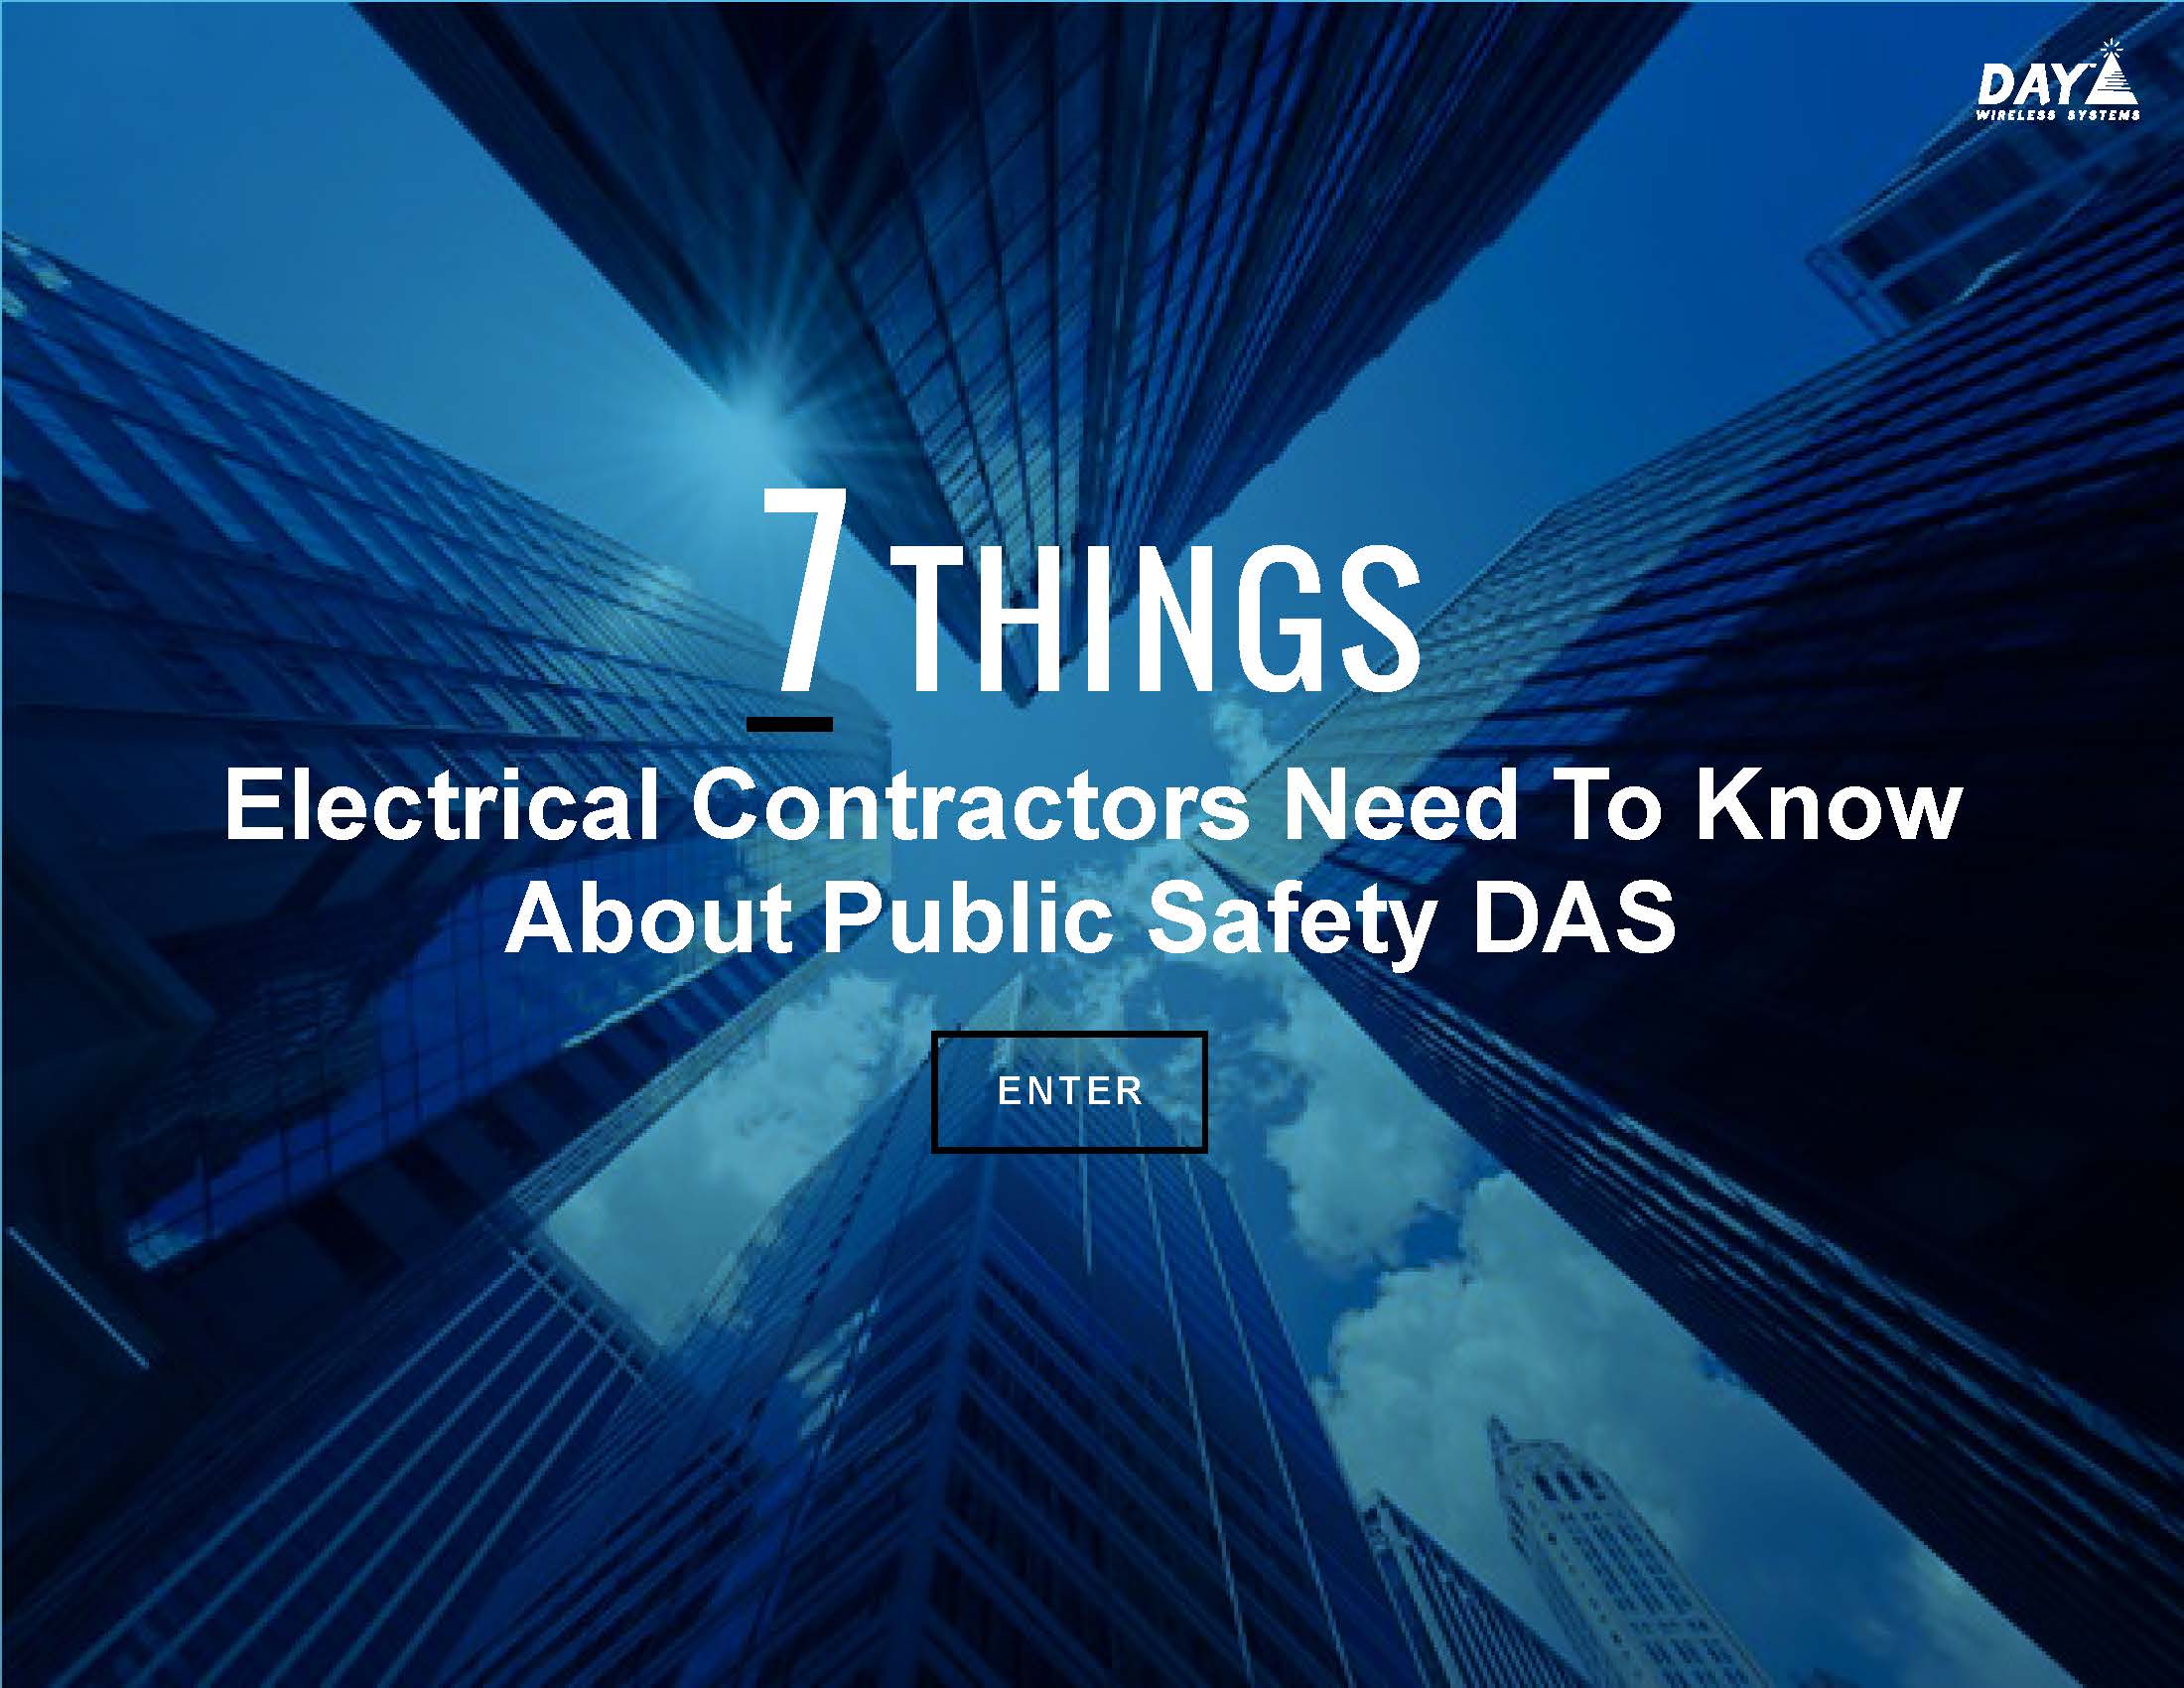 7 Things Electrical Contractors Need to Know about DAS Updated